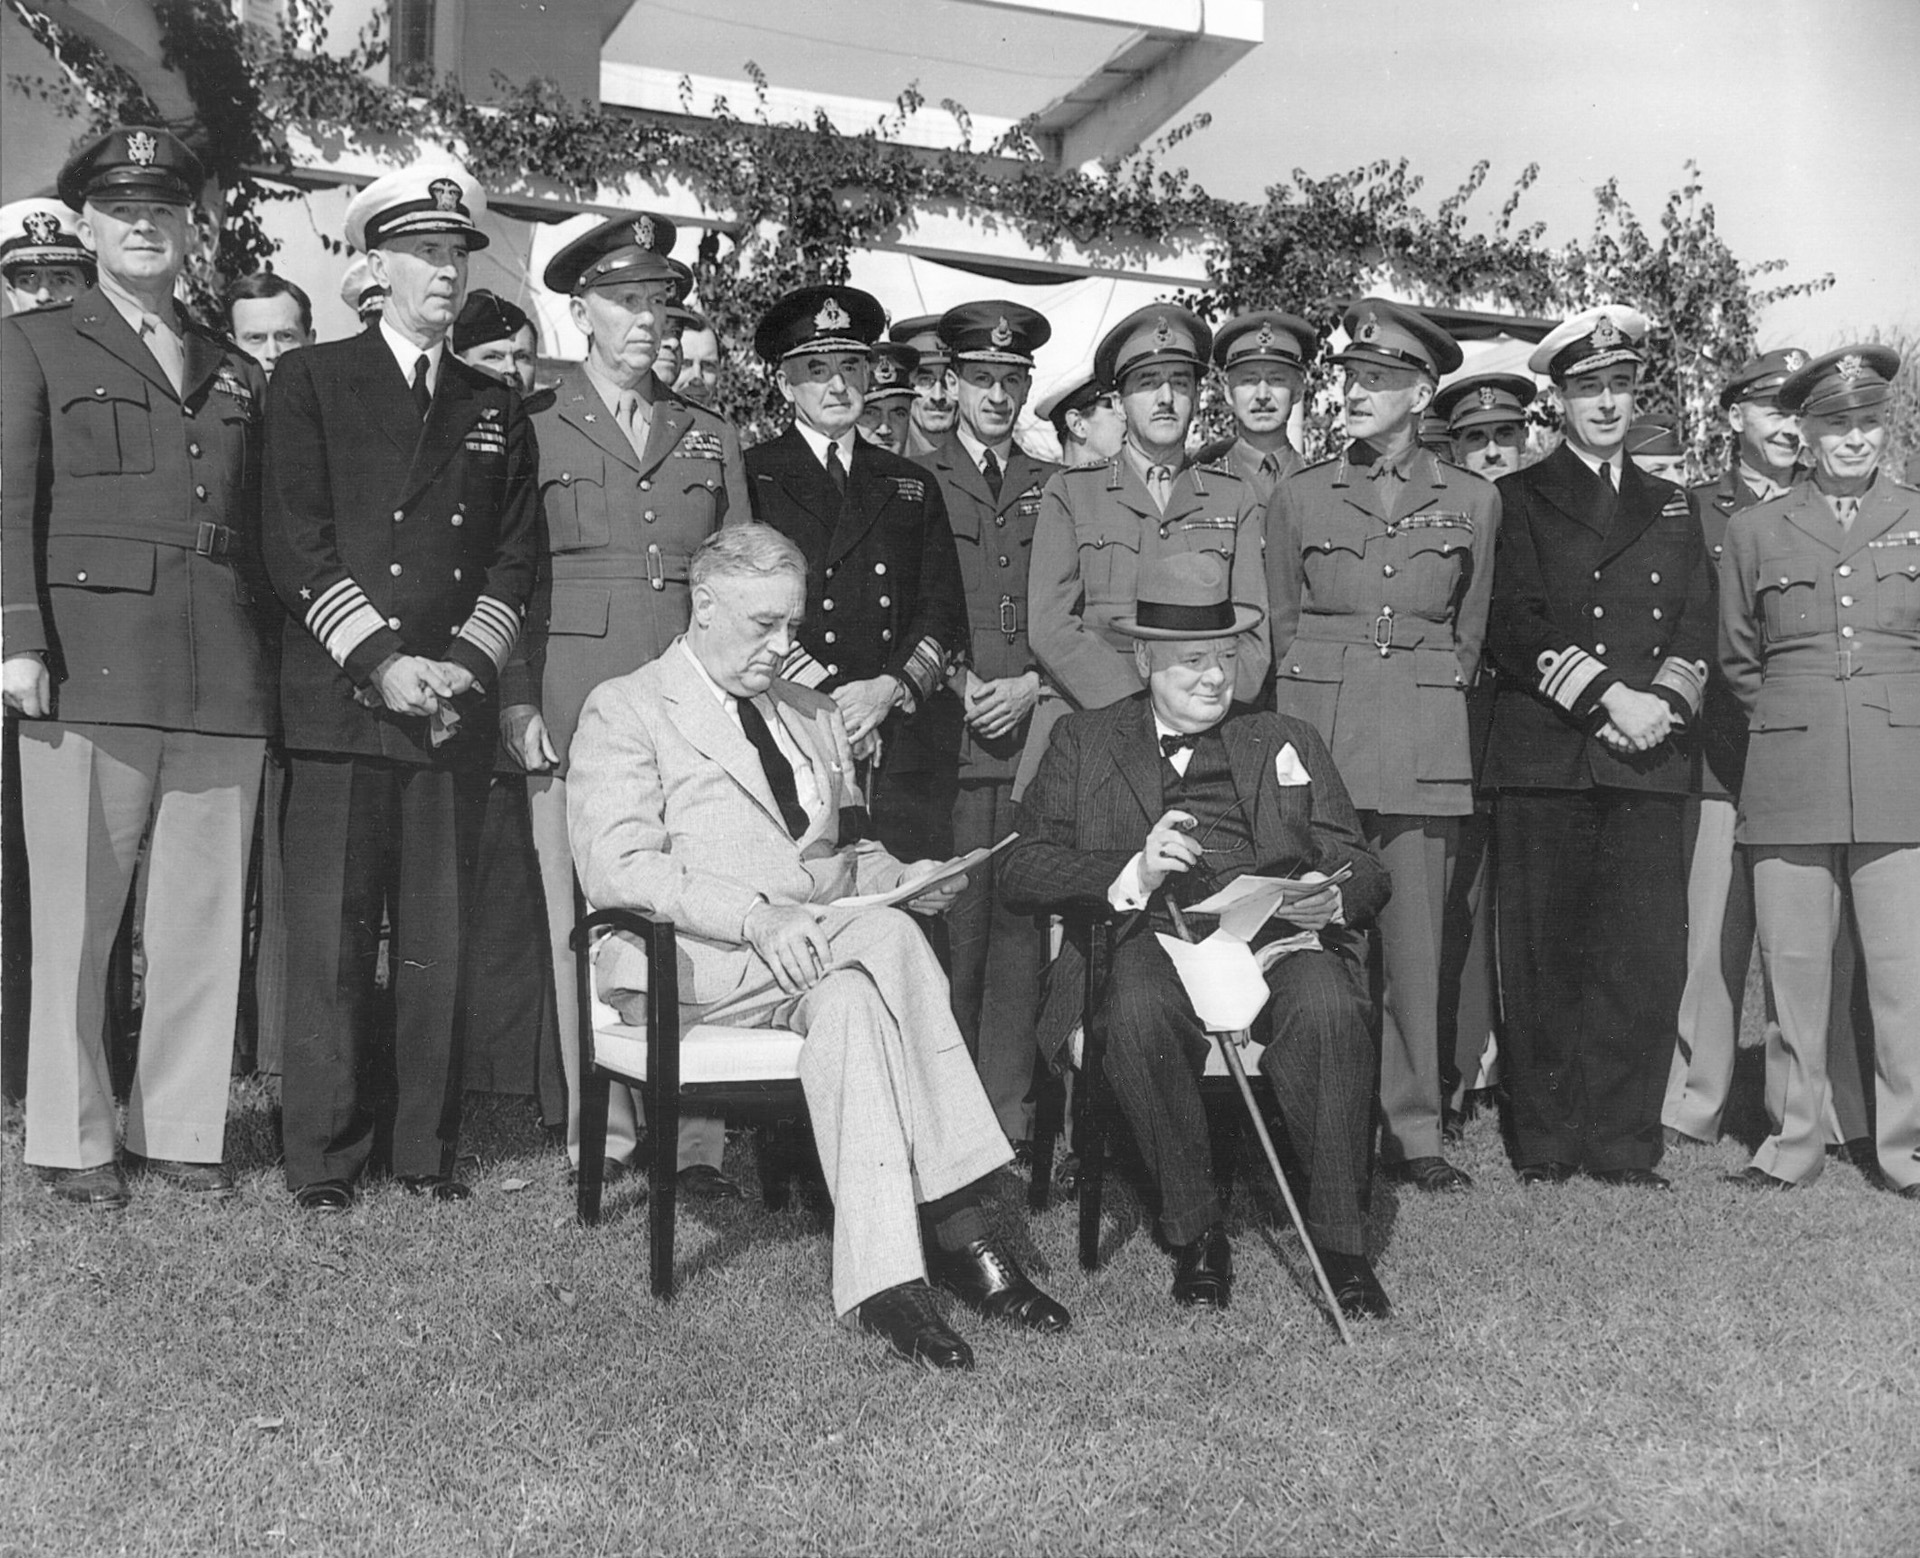 Roosevelt and British Prime Minister Winston Churchill pause with their staffs during the Casablanca Conference.